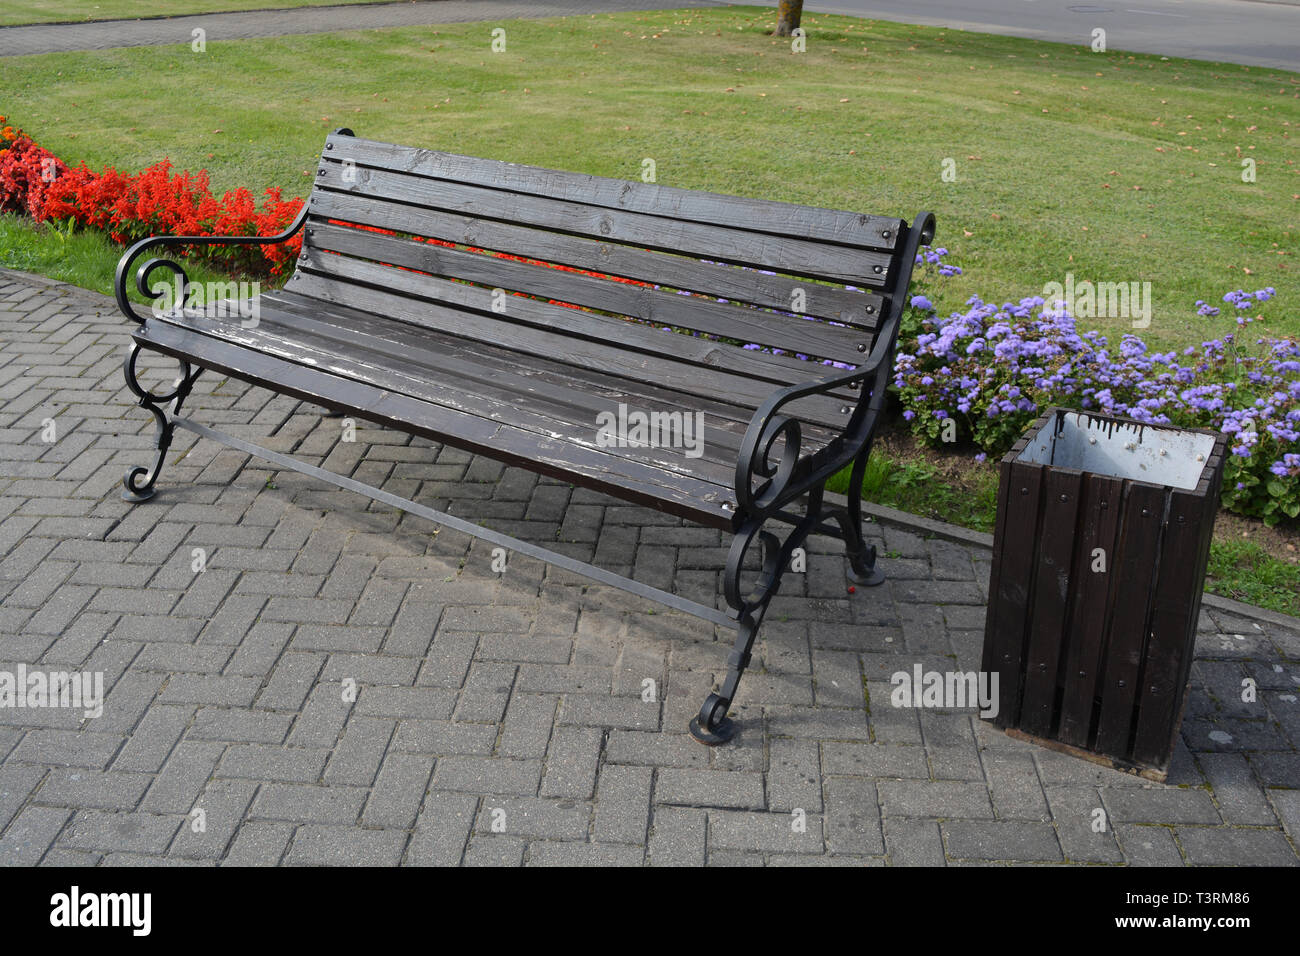 Modern wooden bench with metal frame in city street, flowerbeds and dustbin Stock Photo